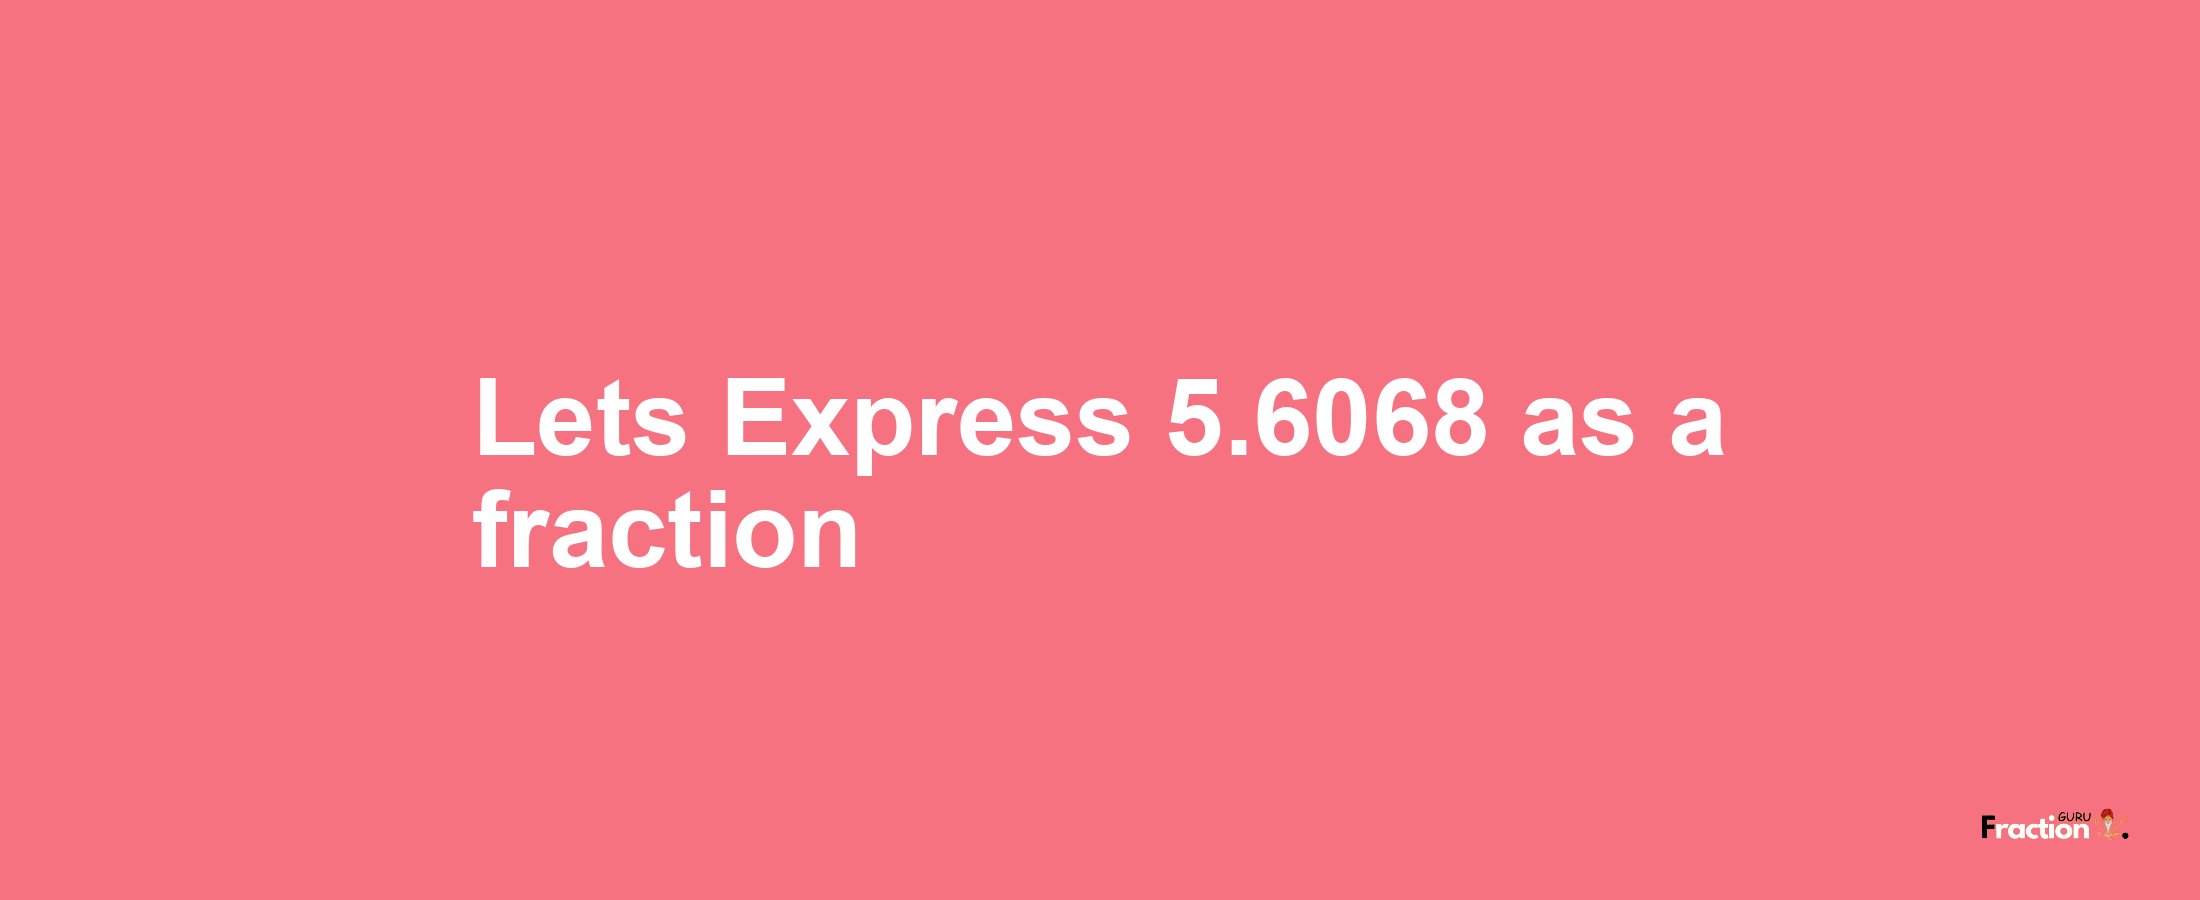 Lets Express 5.6068 as afraction